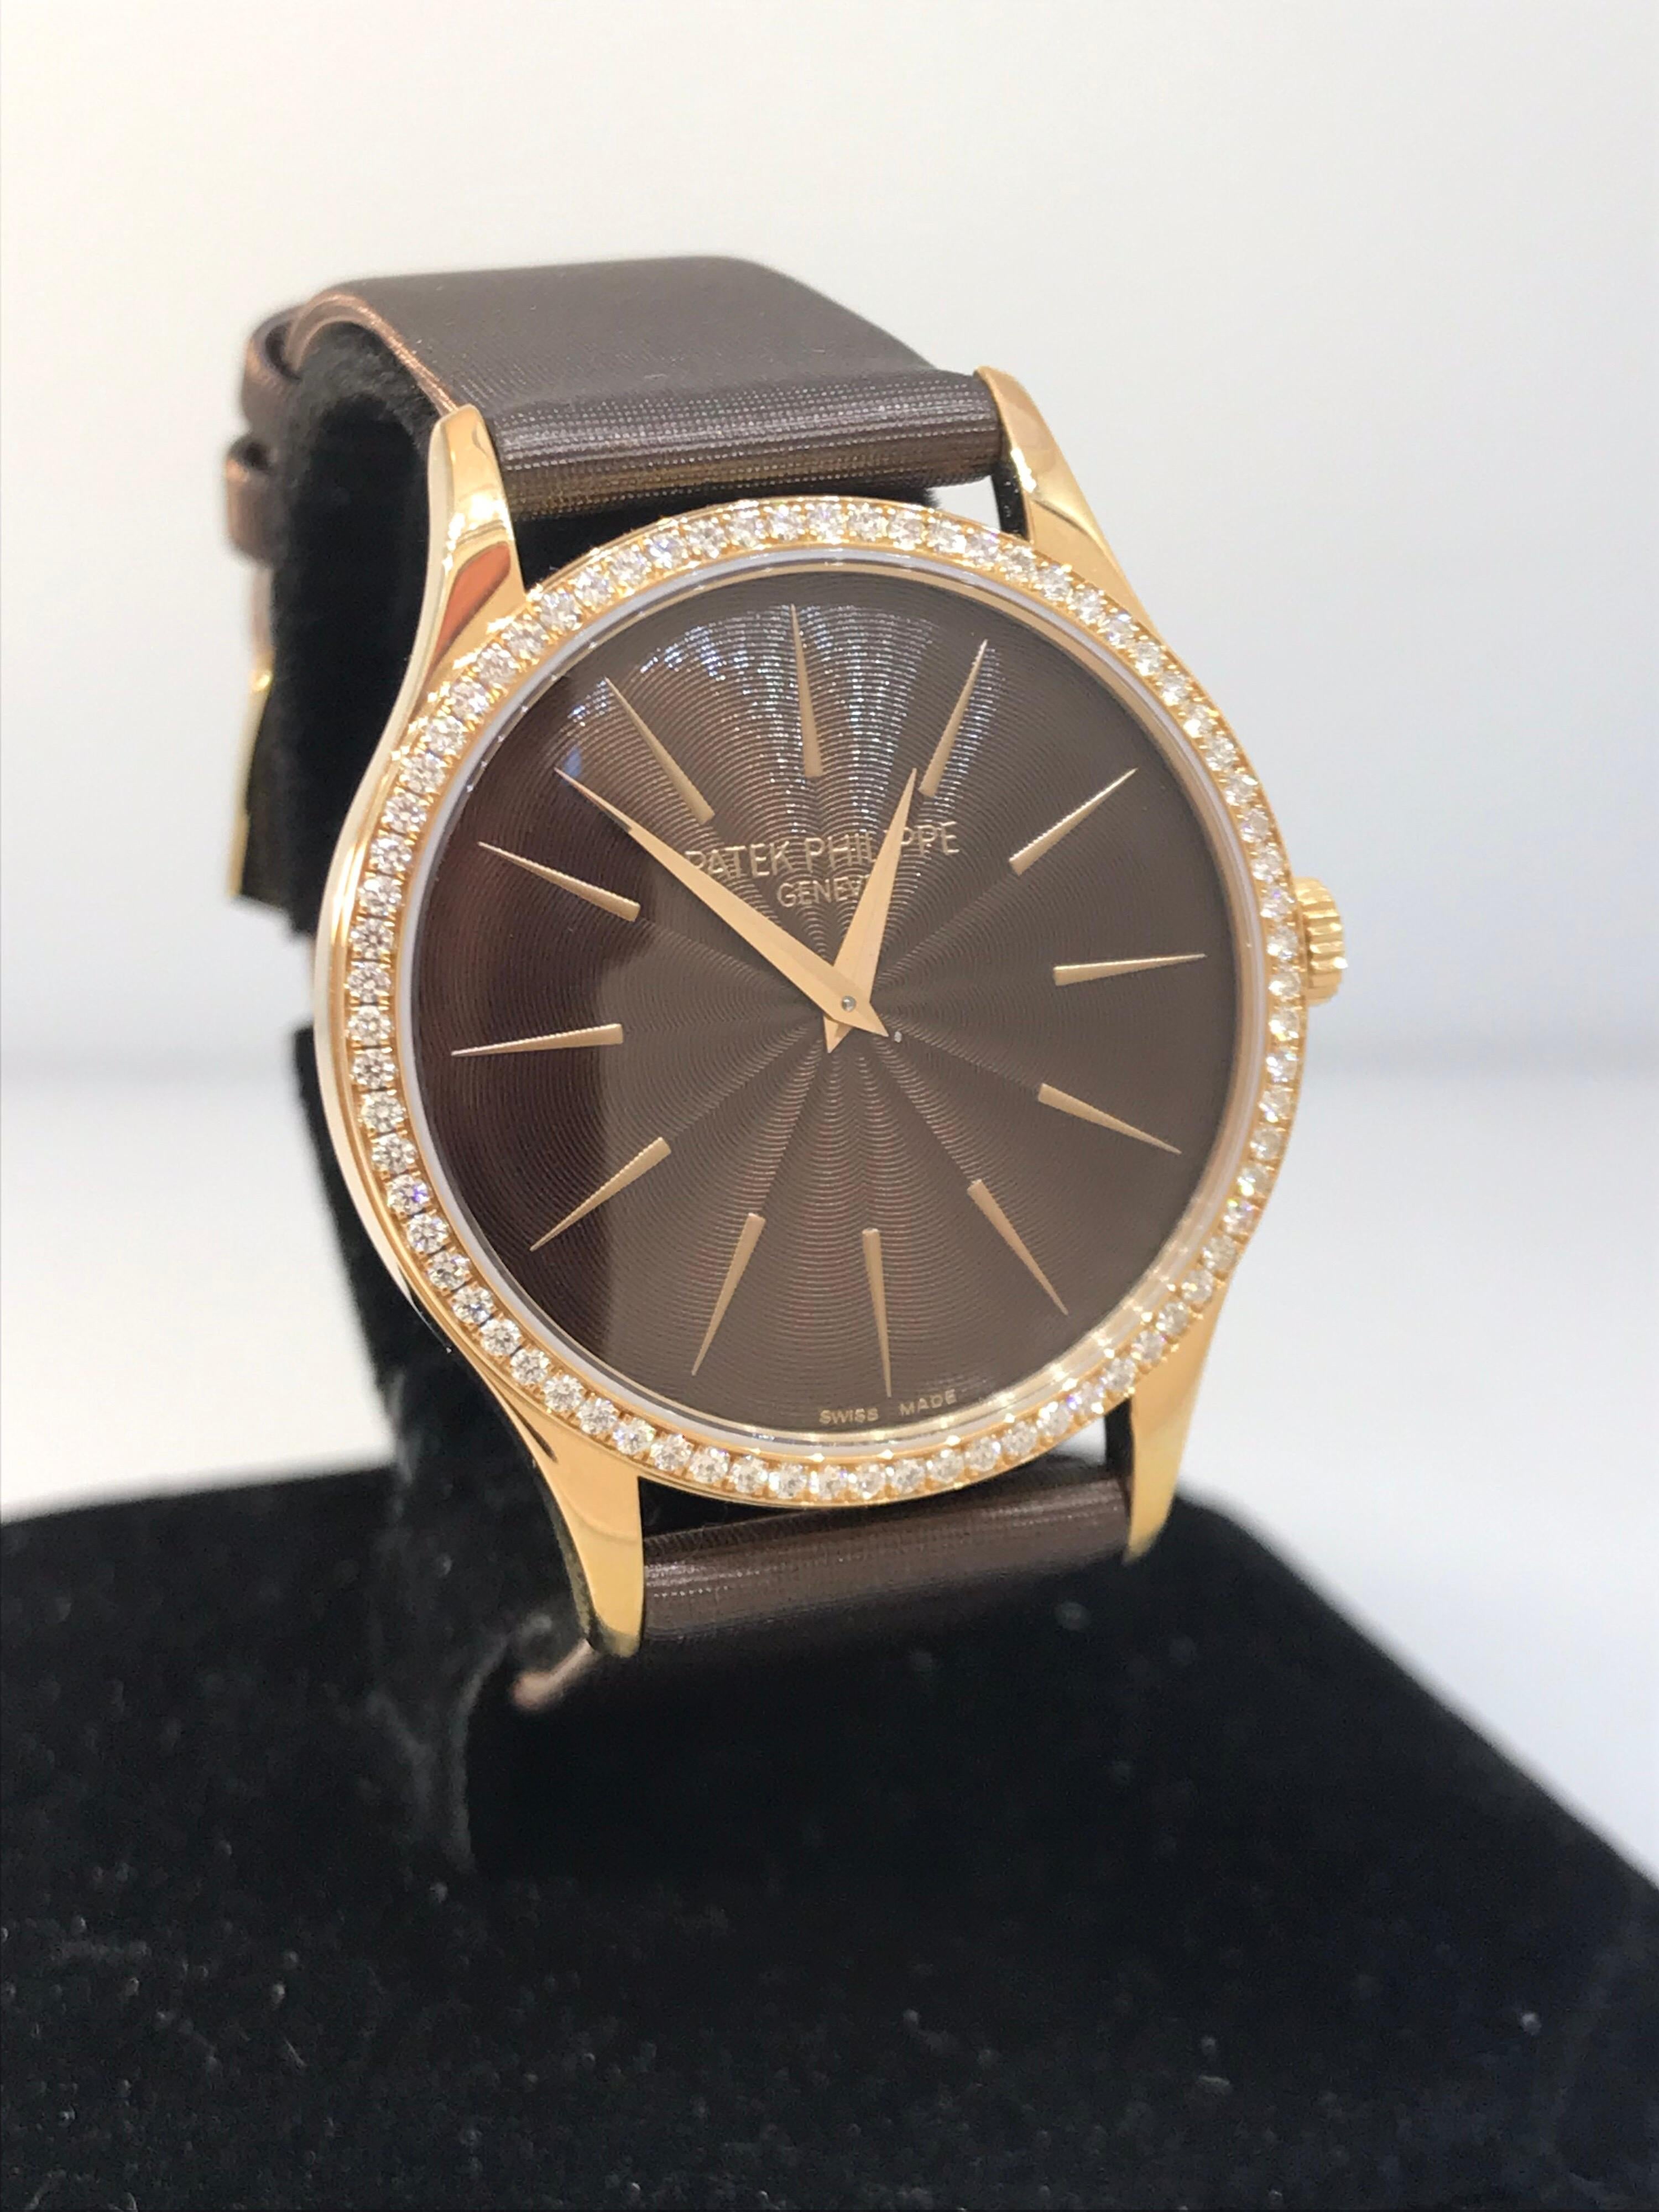 Patek Philippe Calatrava Ladies Watch

Model Number: 4897R-001

100% Authentic

Brand New

Comes with original Patek Philippe Box and Papers

18 Karat White Gold Case & Buckle

Diamond Bezel (72 Diamonds .47 Carats)  

Chocolate Brown Guilloched